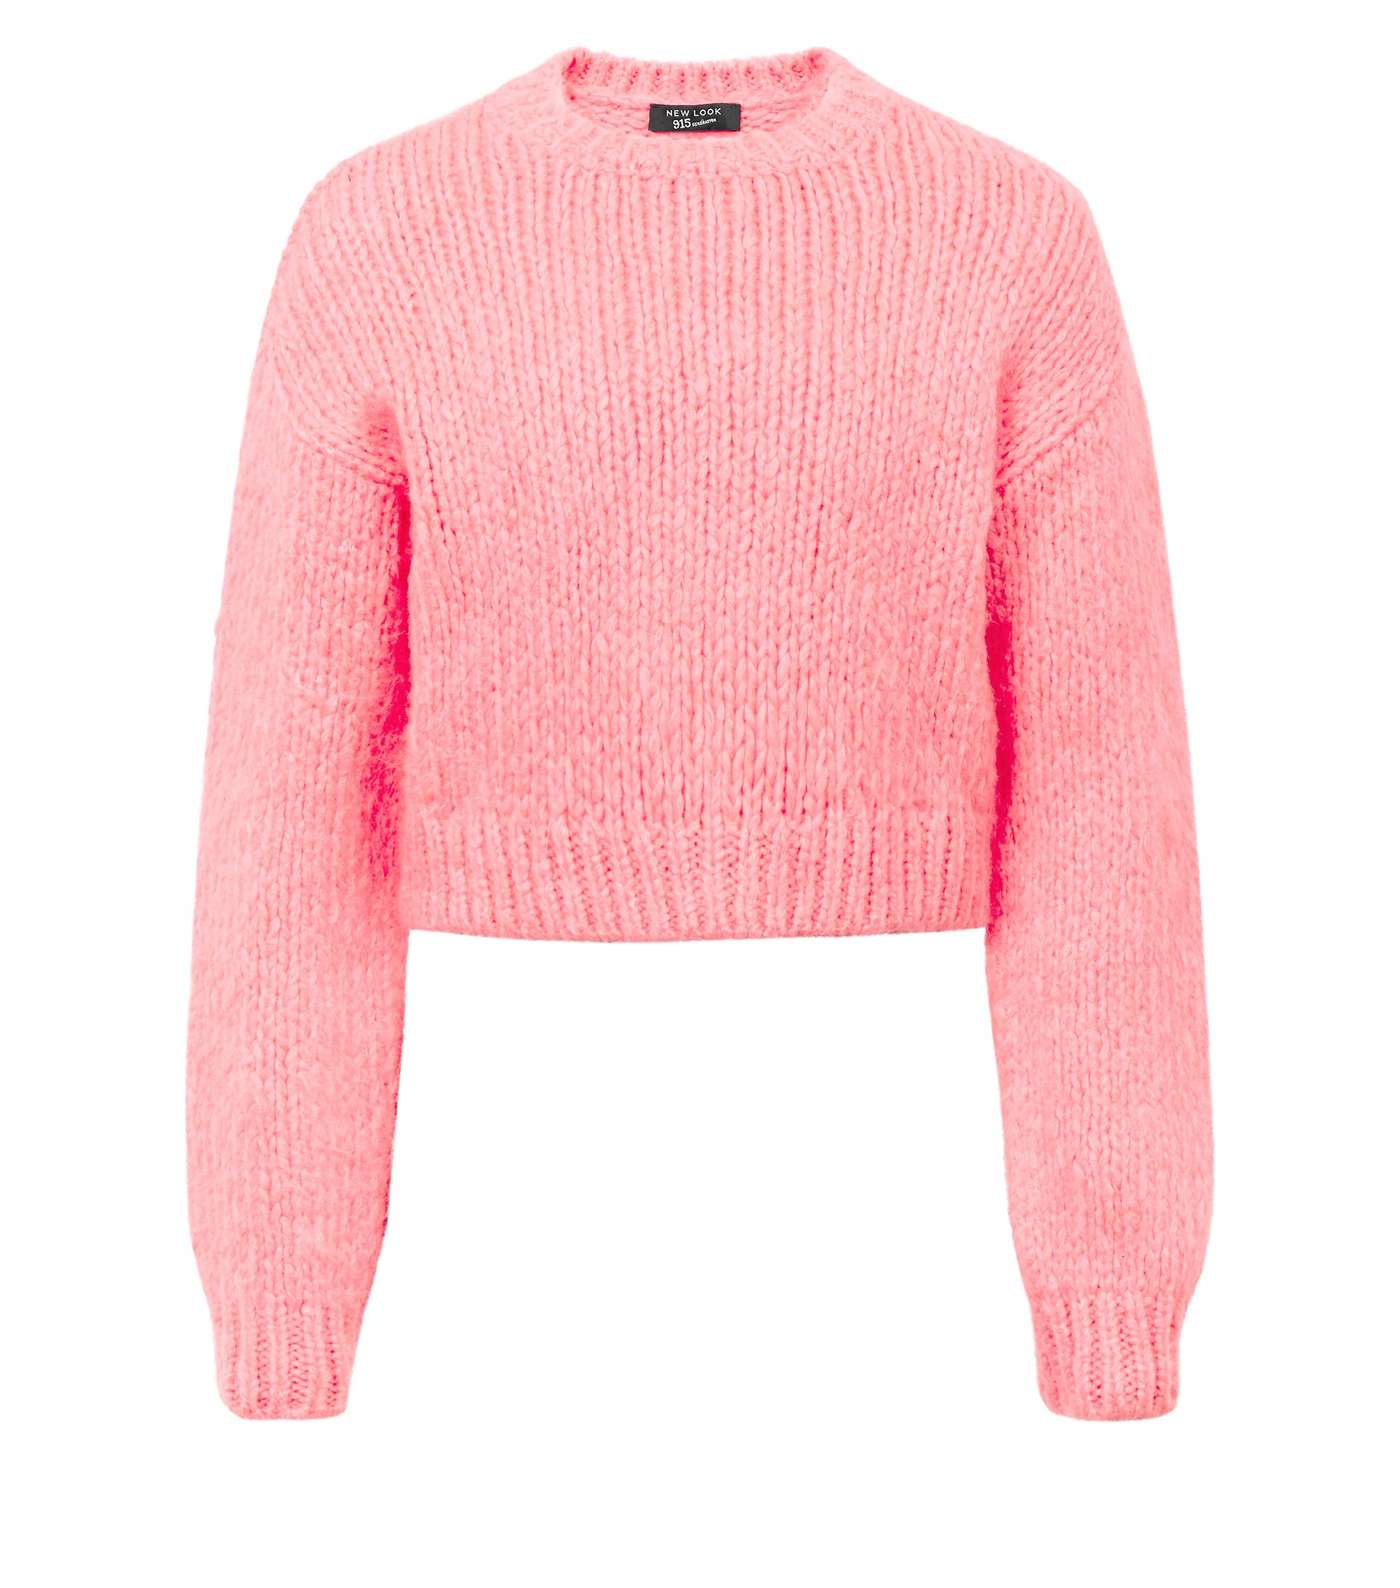 Girls Neon Pink Chunky Knit Jumper  Image 4